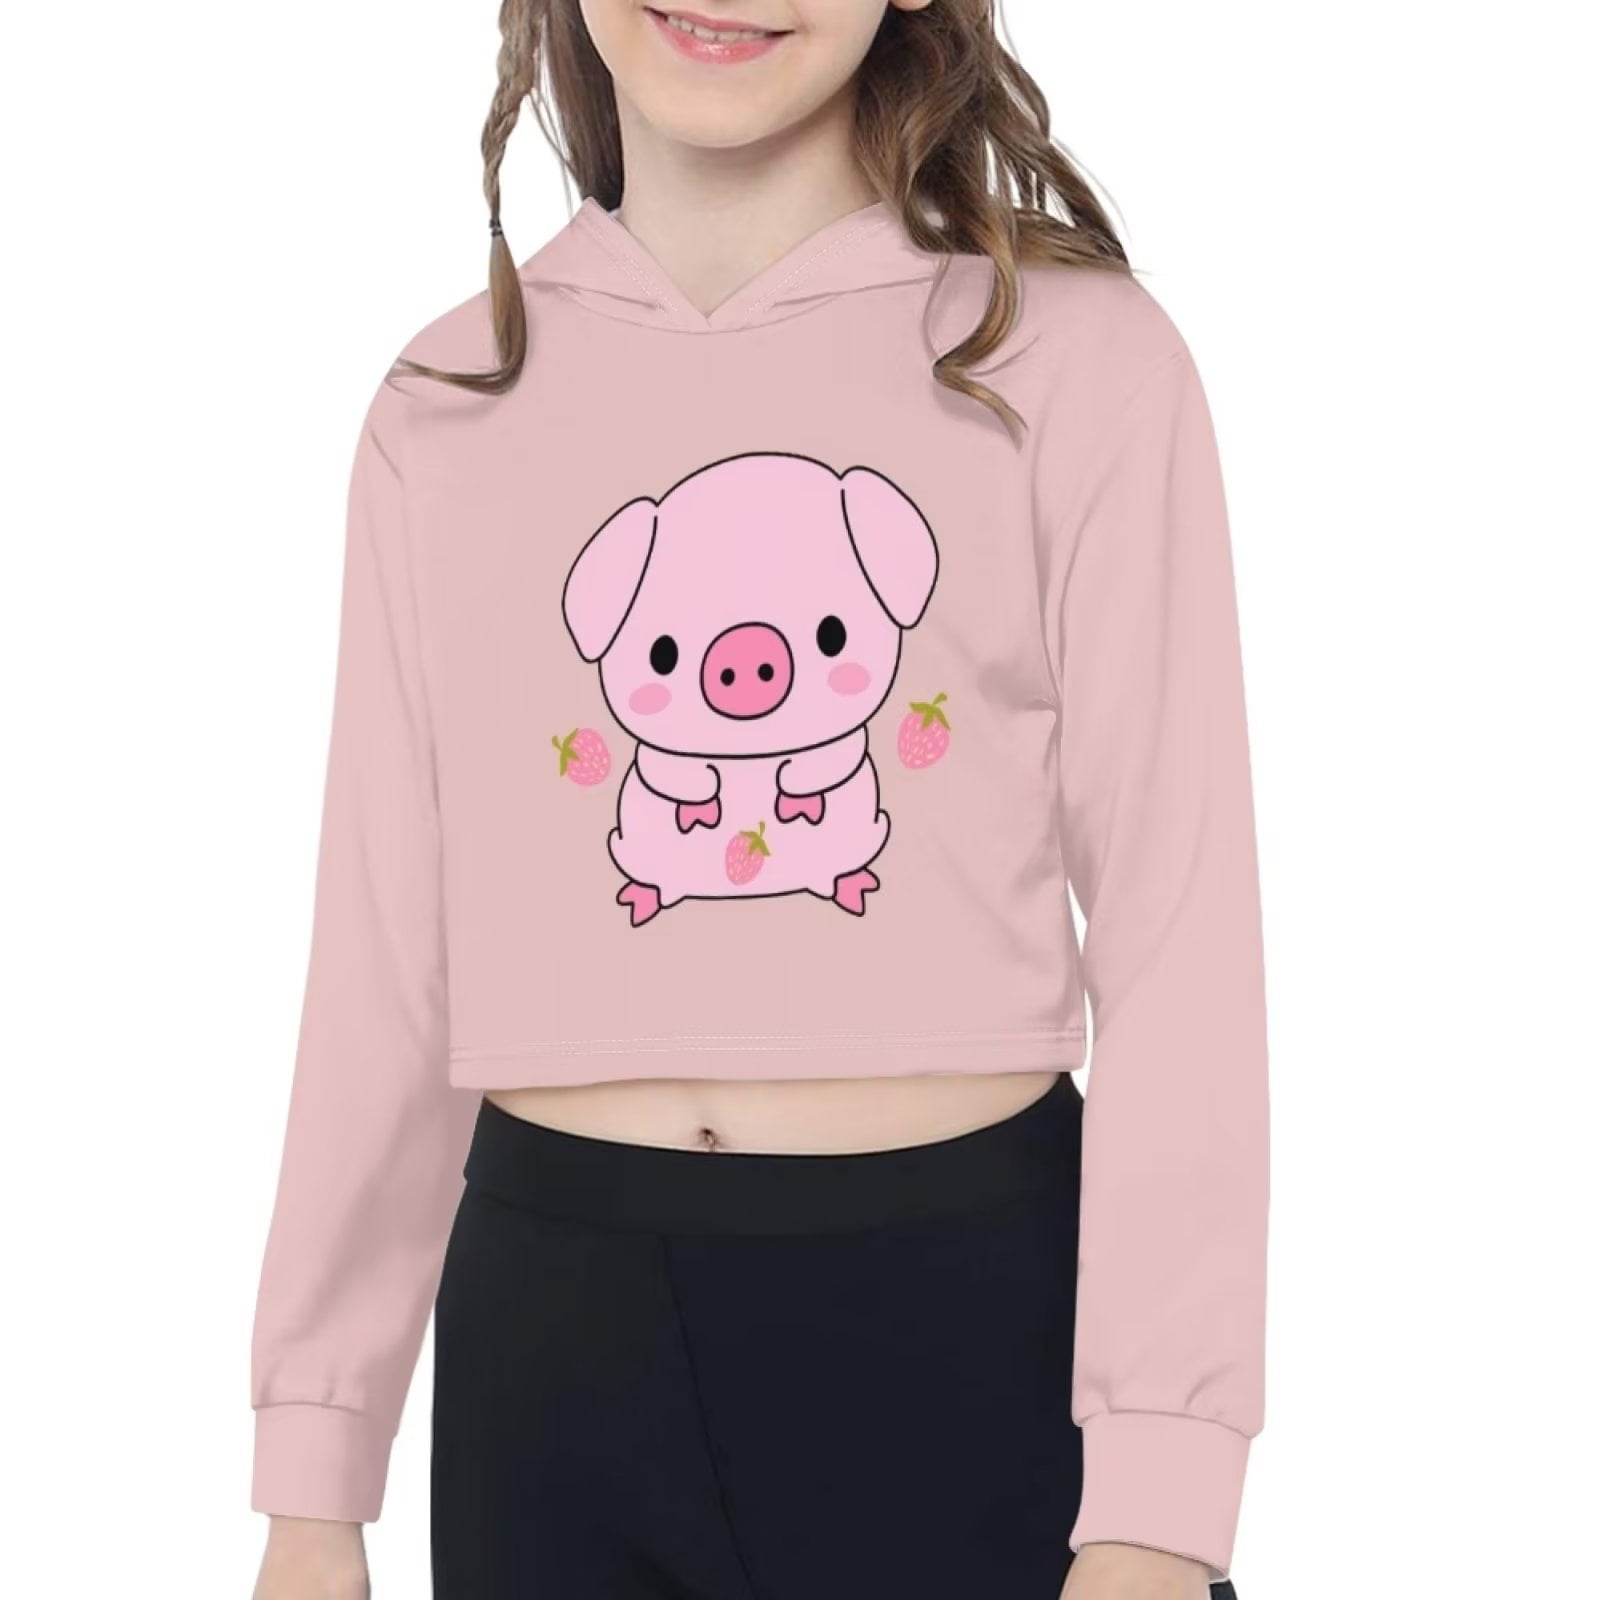 Girls Clothes – Dresses, Hoodies, Sweaters and School Wear